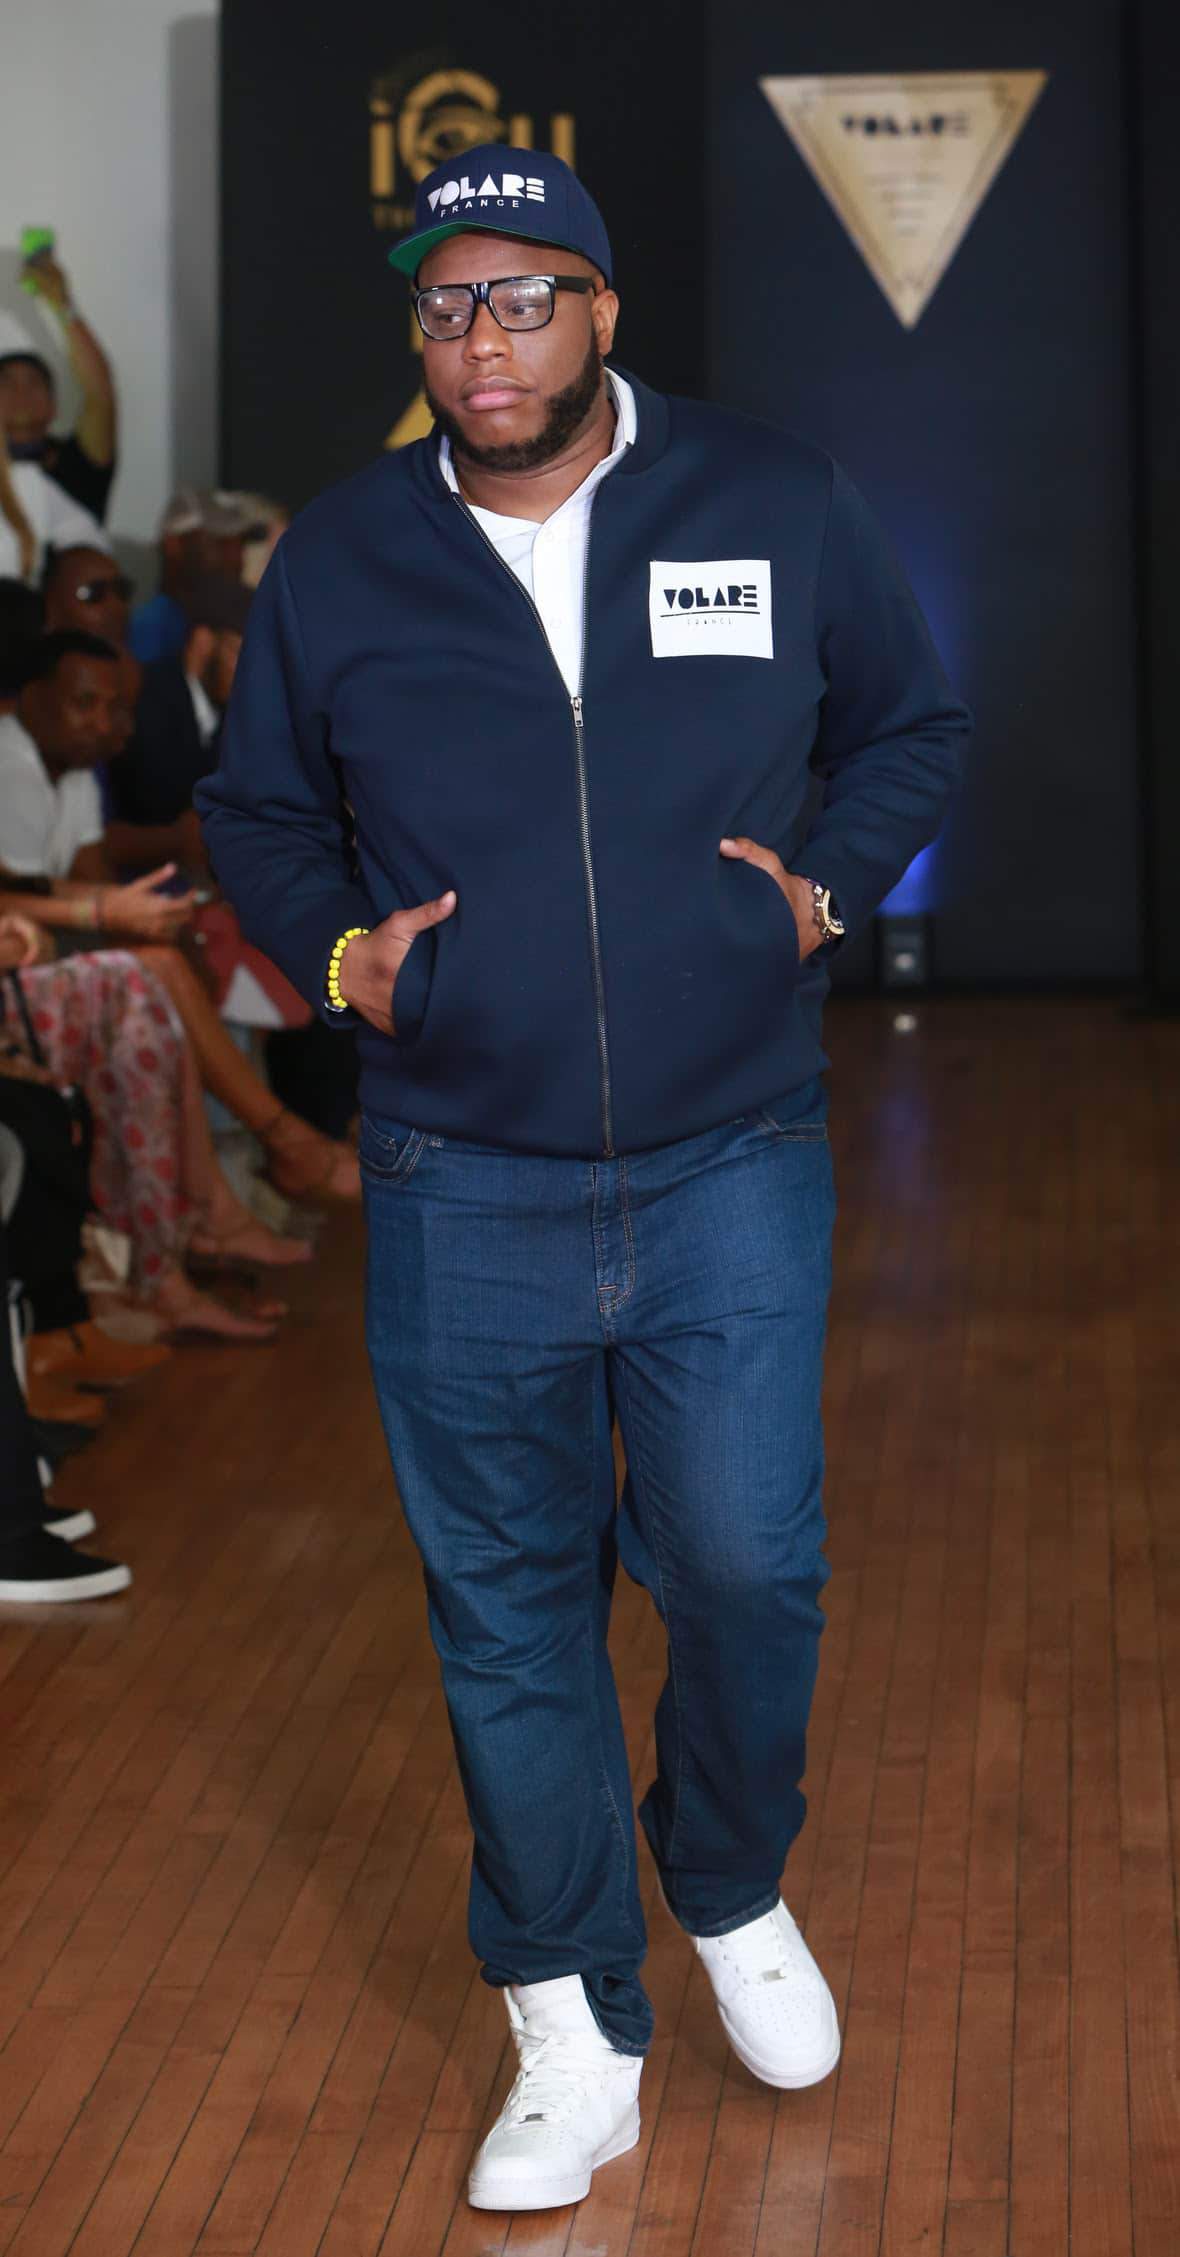 Big & Tall Menswear Collection- Volare at NYFW 